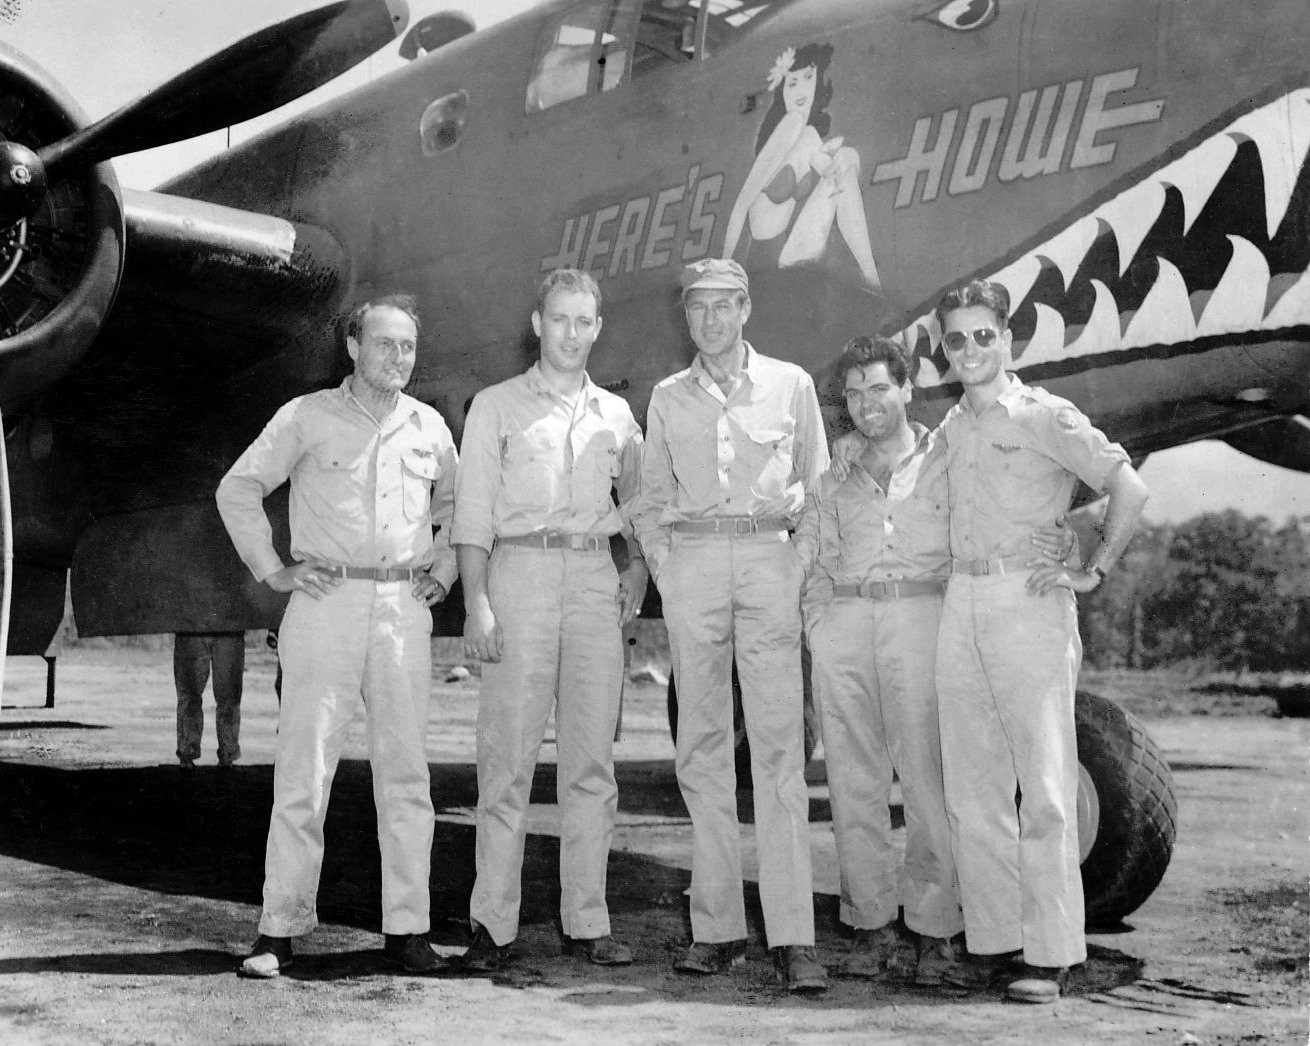 Actor Gary Cooper with pilots of 90th Squadron of USAAF 3rd Bomb Group and B-25D bomber 'Here's Howe', Dobodura Airfield, Australian Papua, mid-1943